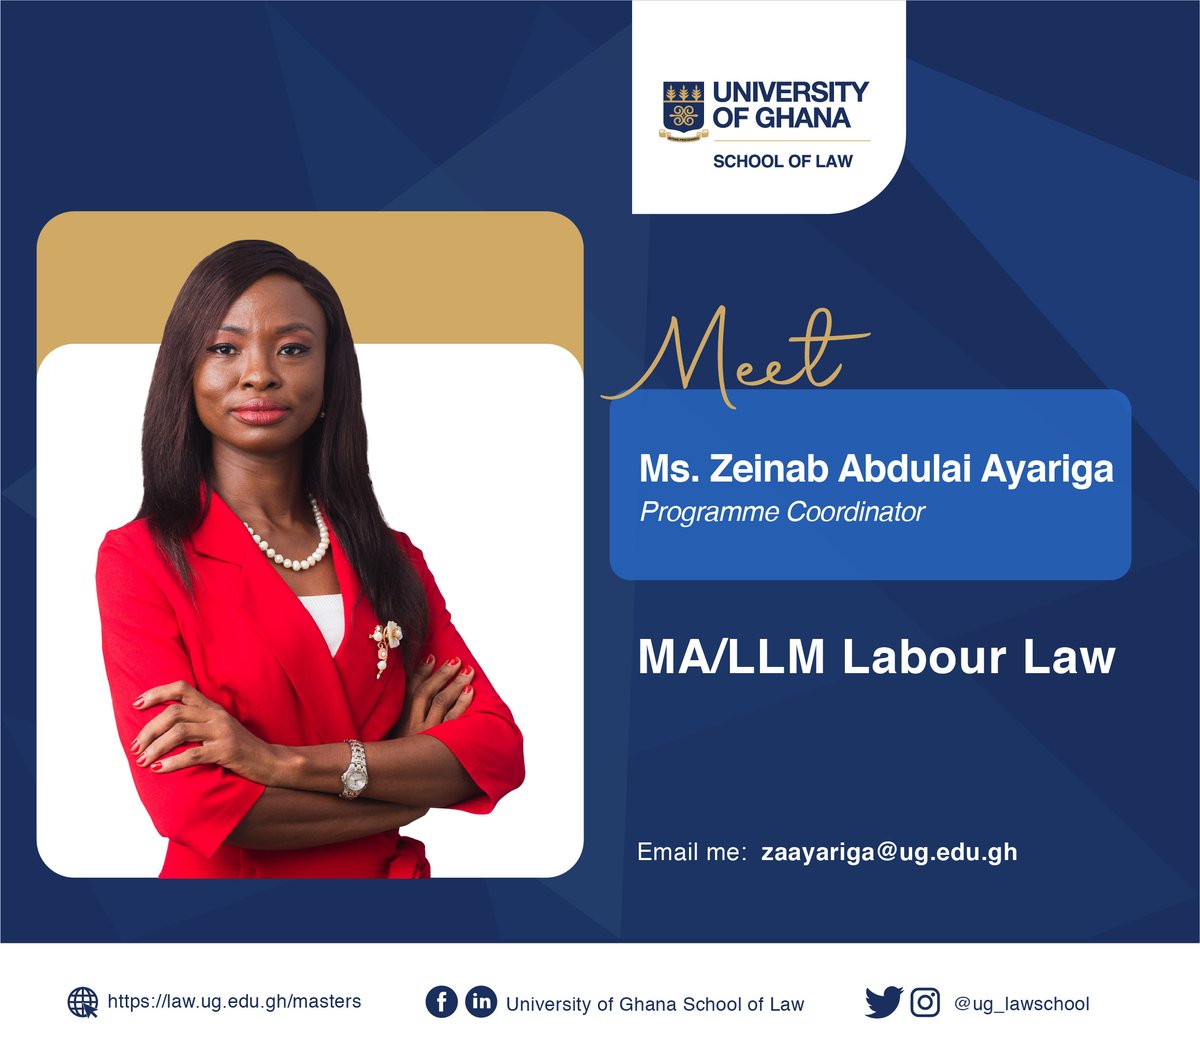 #UGSoLFacultyProfile: Ms. Zeinab Abdulai Ayariga is the Coordinator for MA/LLM Labour Law. 

This programme provides a distinctively in-depth study of Domestic and International Labour Law.

Welcome Aboard!

#Labour #Employment #HumanRightsLaw #HumanRights #law #humanrights